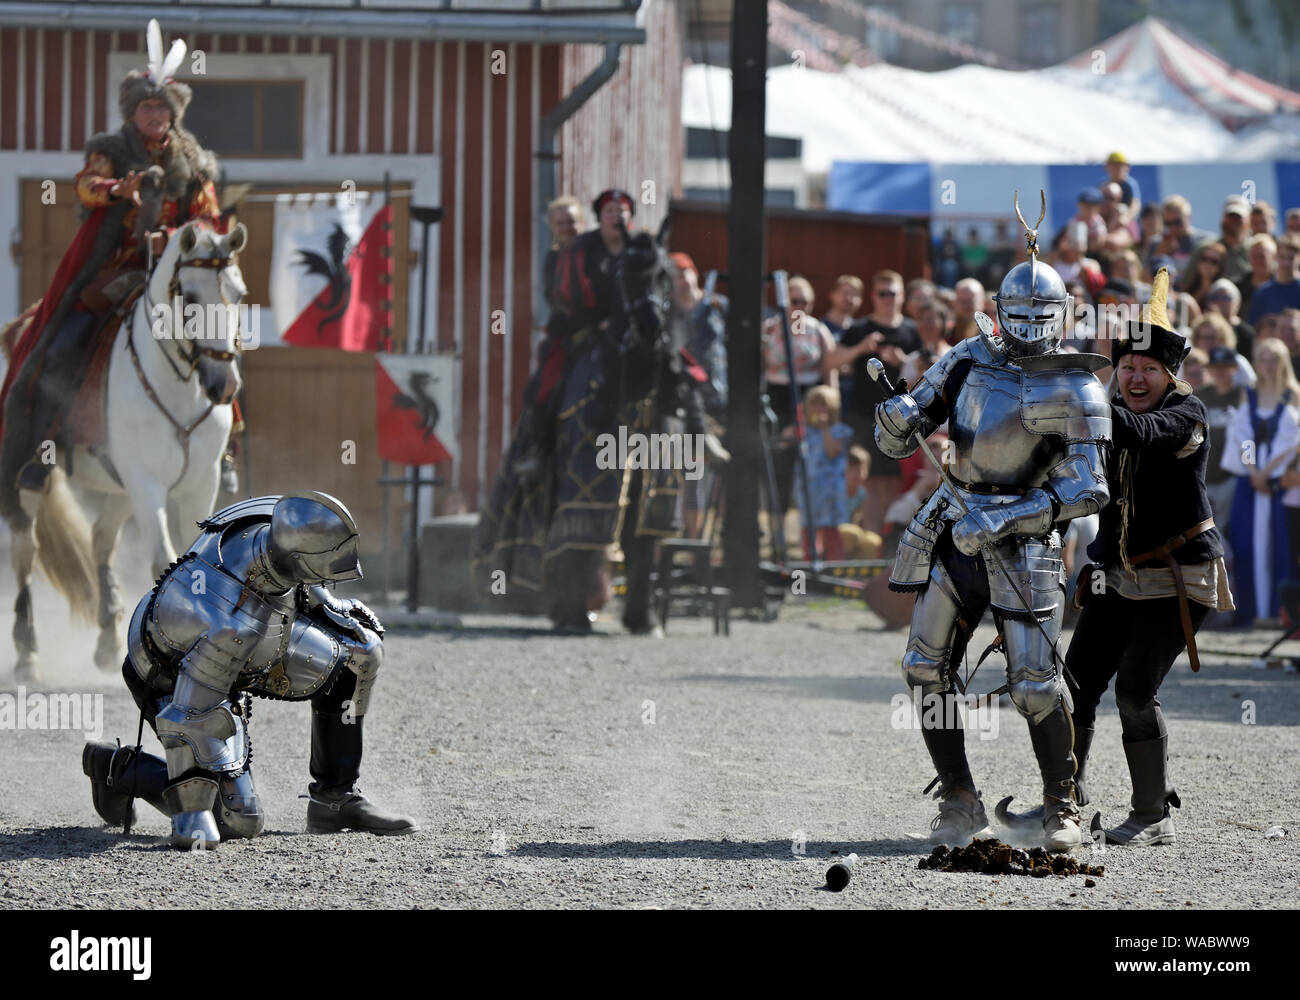 Hameenlinna Finland 08/17/2019 Medieval festival with craftsman, knights and entertainers. Two knights in harness fighting on a dusty field. Stock Photo